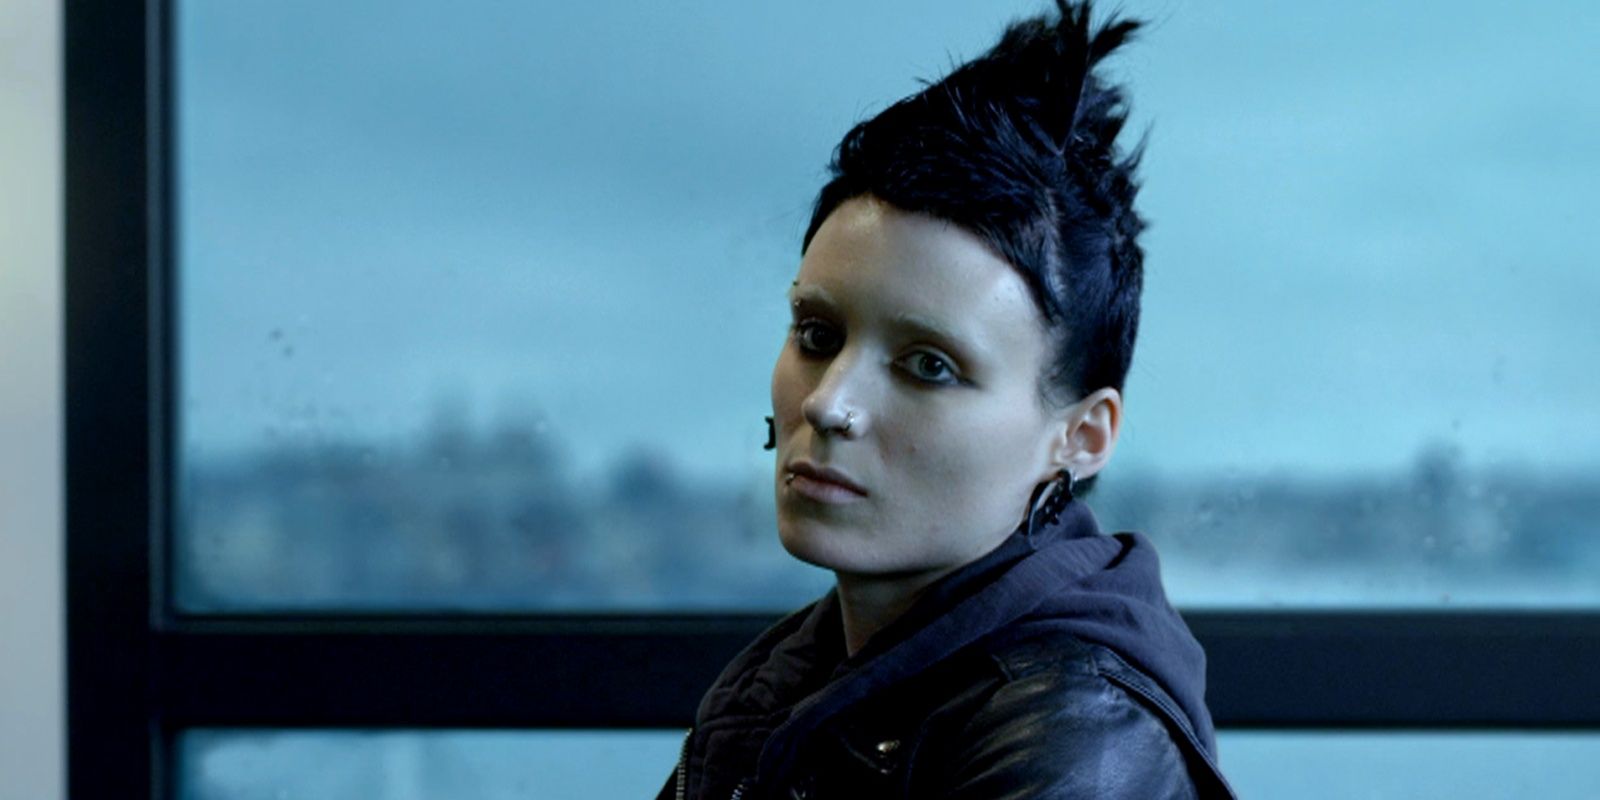 Lisbeth stands by a window in The Girl With The Dragon Tattoo